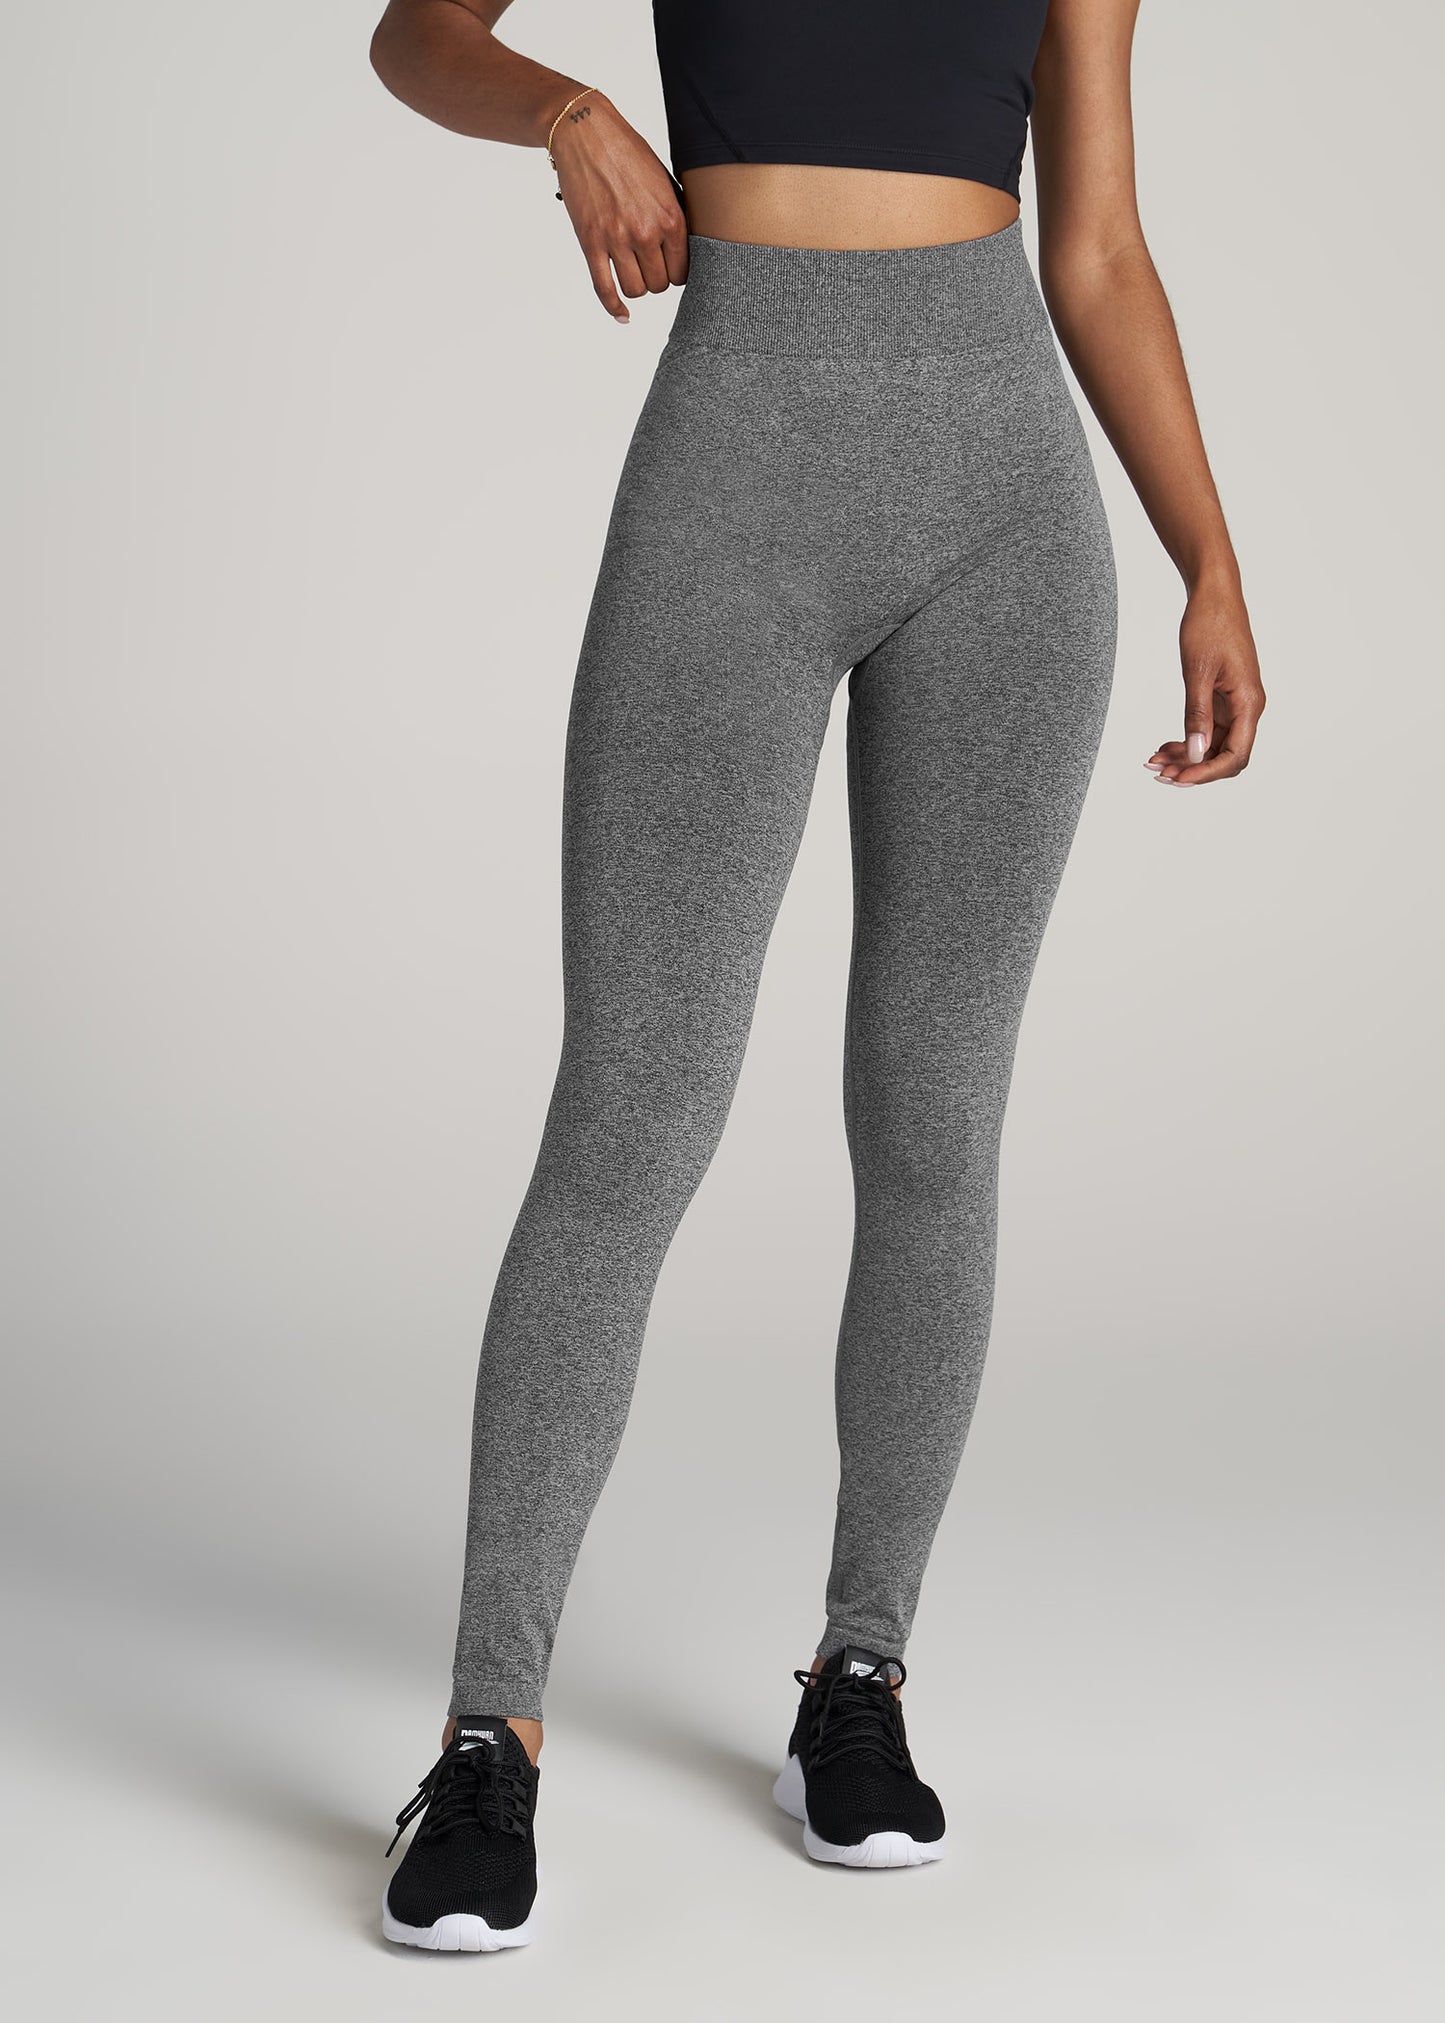 A tall woman wearing American Tall's Seamless Compression Legging in black and grey heather.